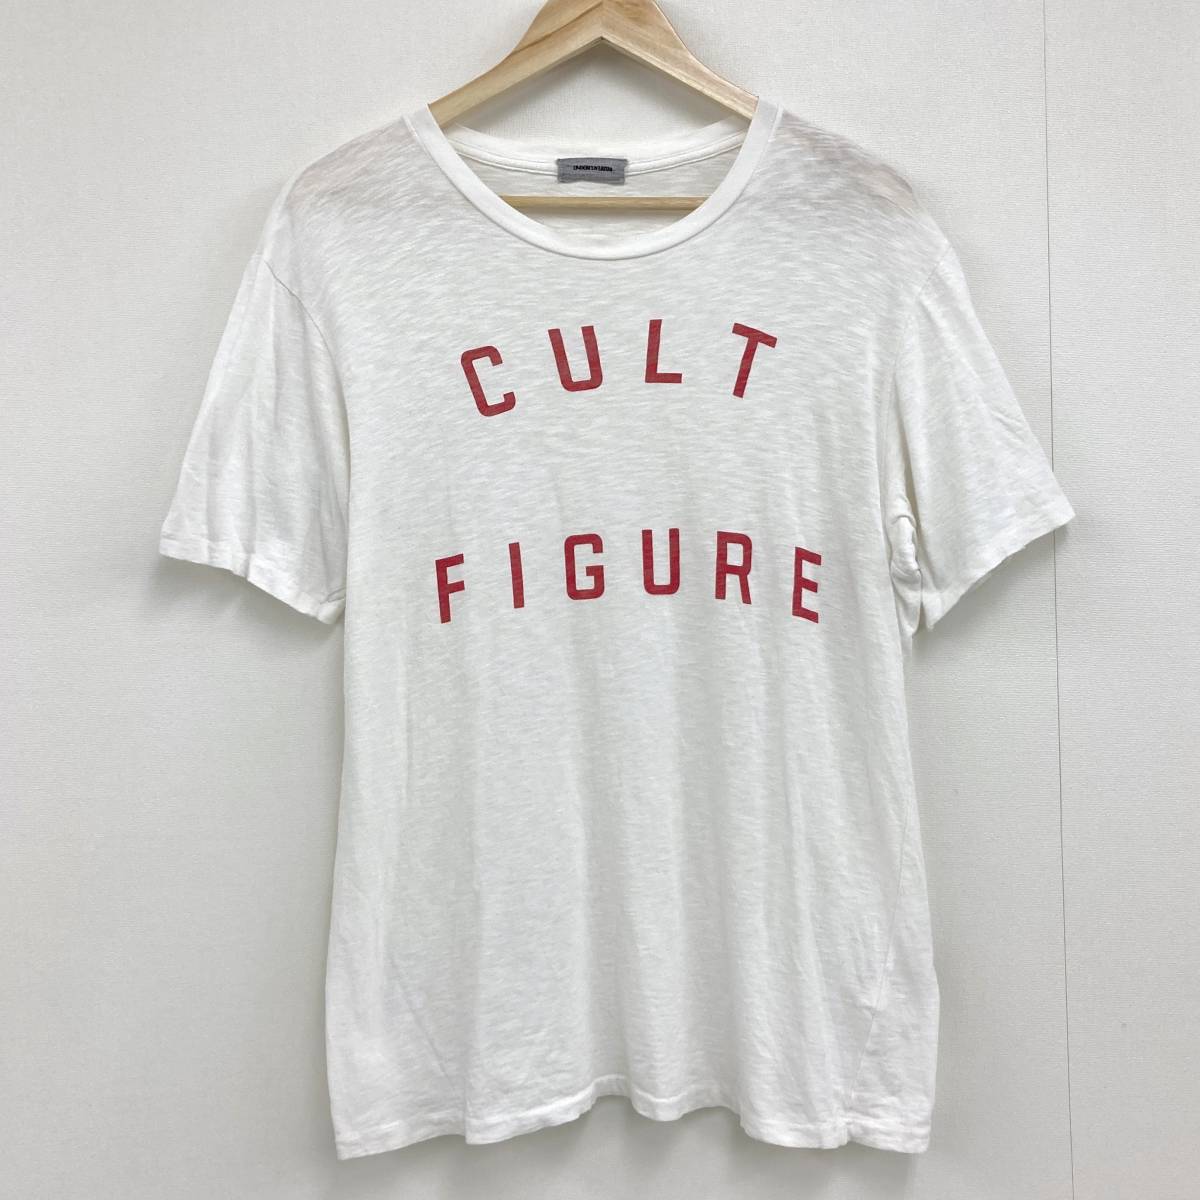 12SS UNDERCOVER OPENSTRINGS CULT FIGURE 半袖 Tシャツ ホワイト 白 2サイズ UNDER COVER アンダーカバー カットソー Tee archive 3040081_画像1